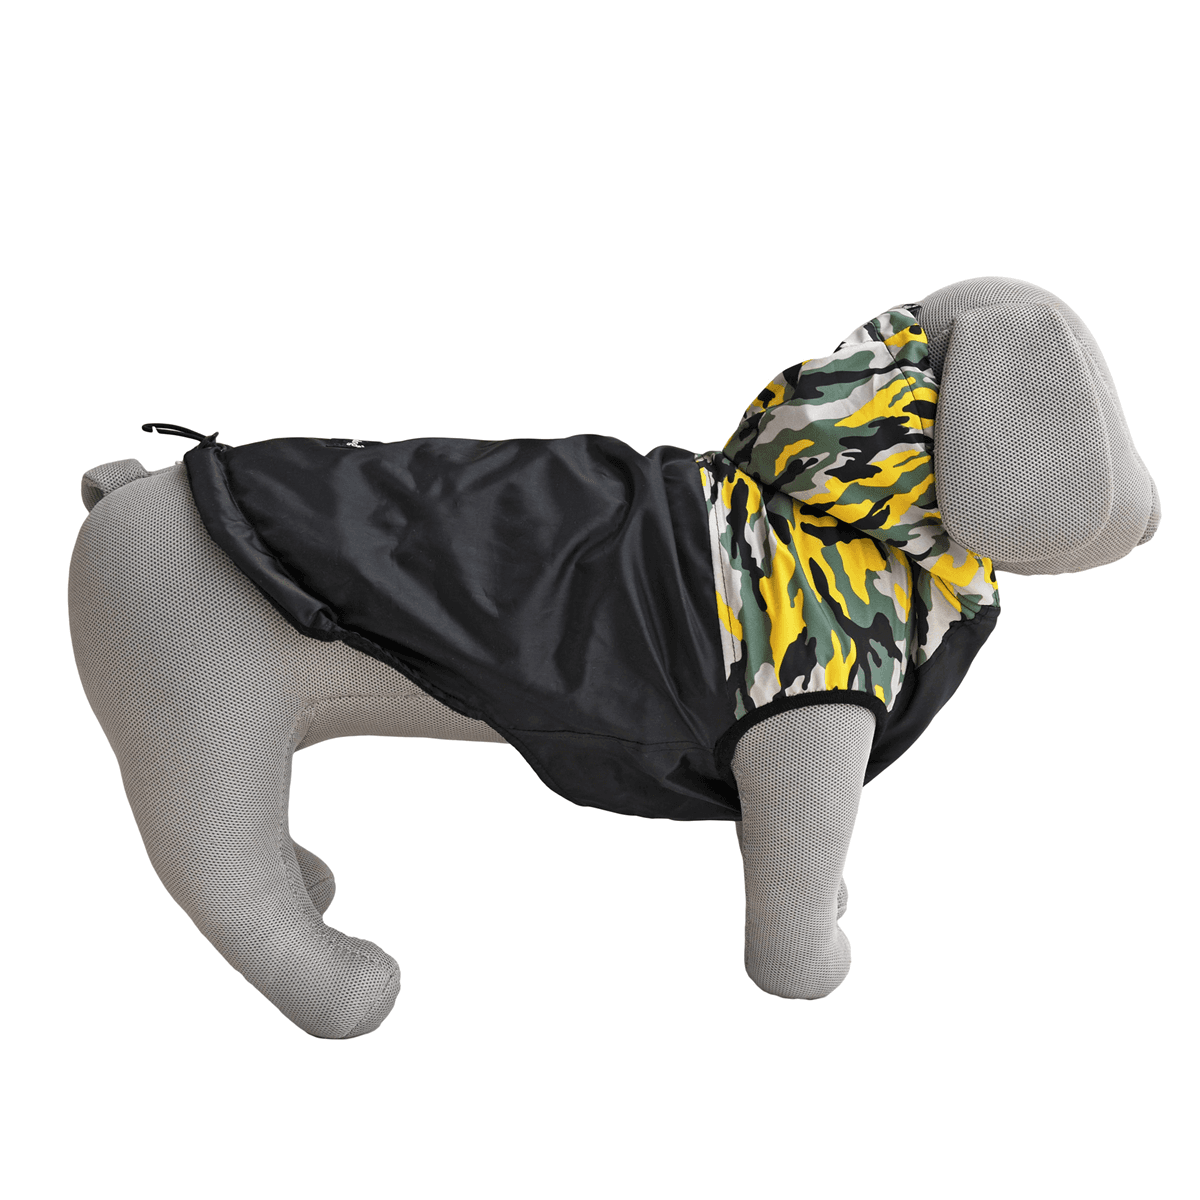 Selected image for 13TH DOG Jakna za pse Yellow Army S 30cm crna